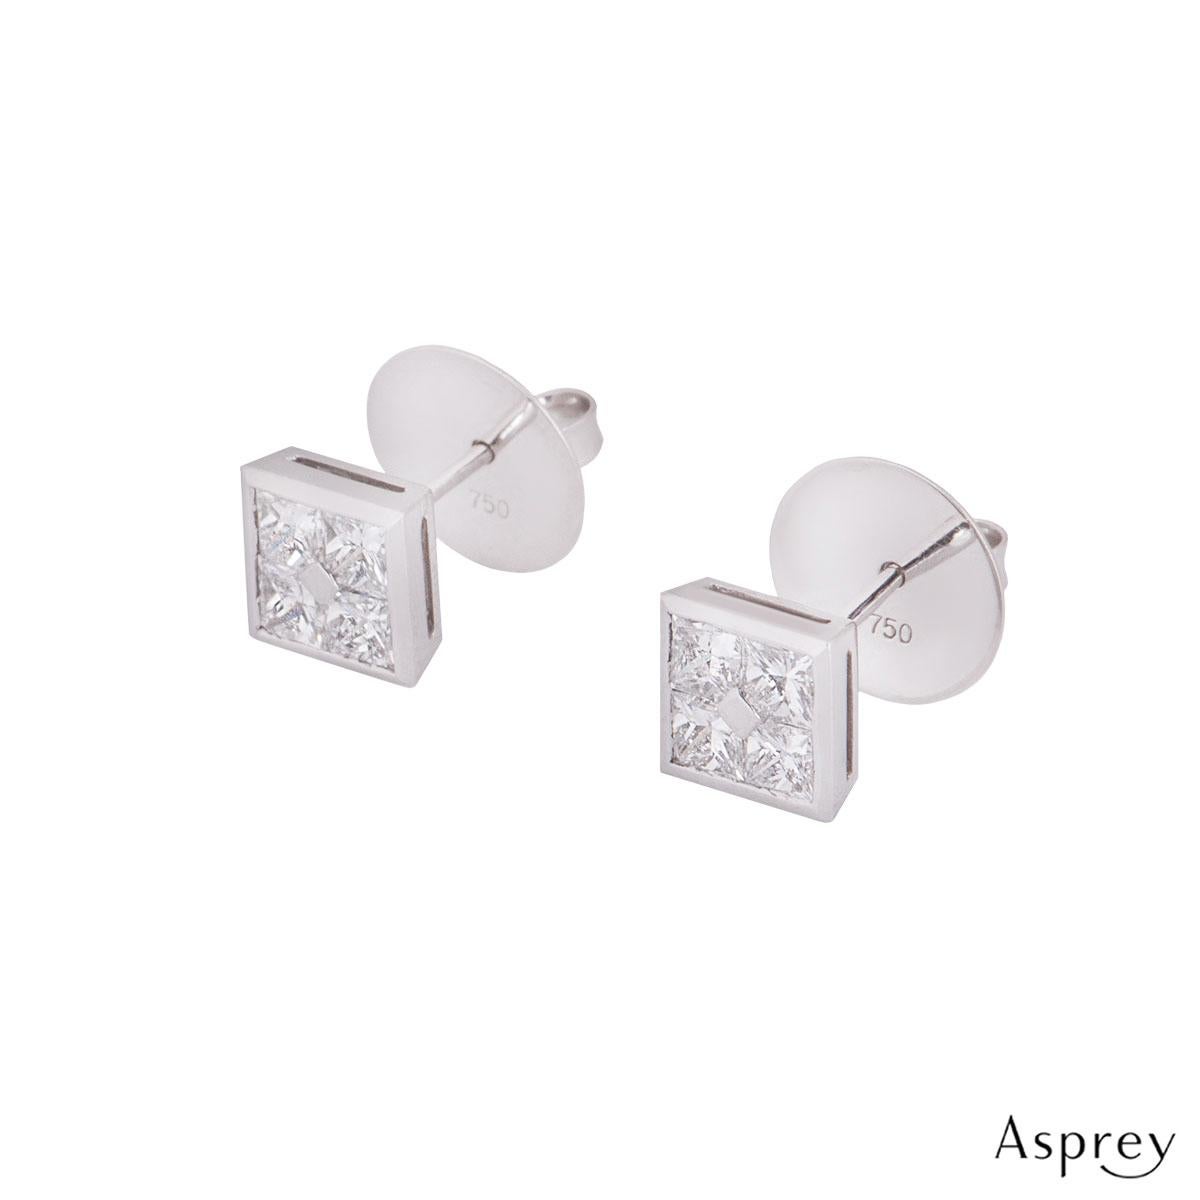 A stunning pair of platinum diamond earrings by Asprey. The earrings are in a square design set with 4 princess cut diamonds in a rub over setting with a total weight of 1.48ct. The earrings feature a post and alpha fitting, measure 0.70cm across